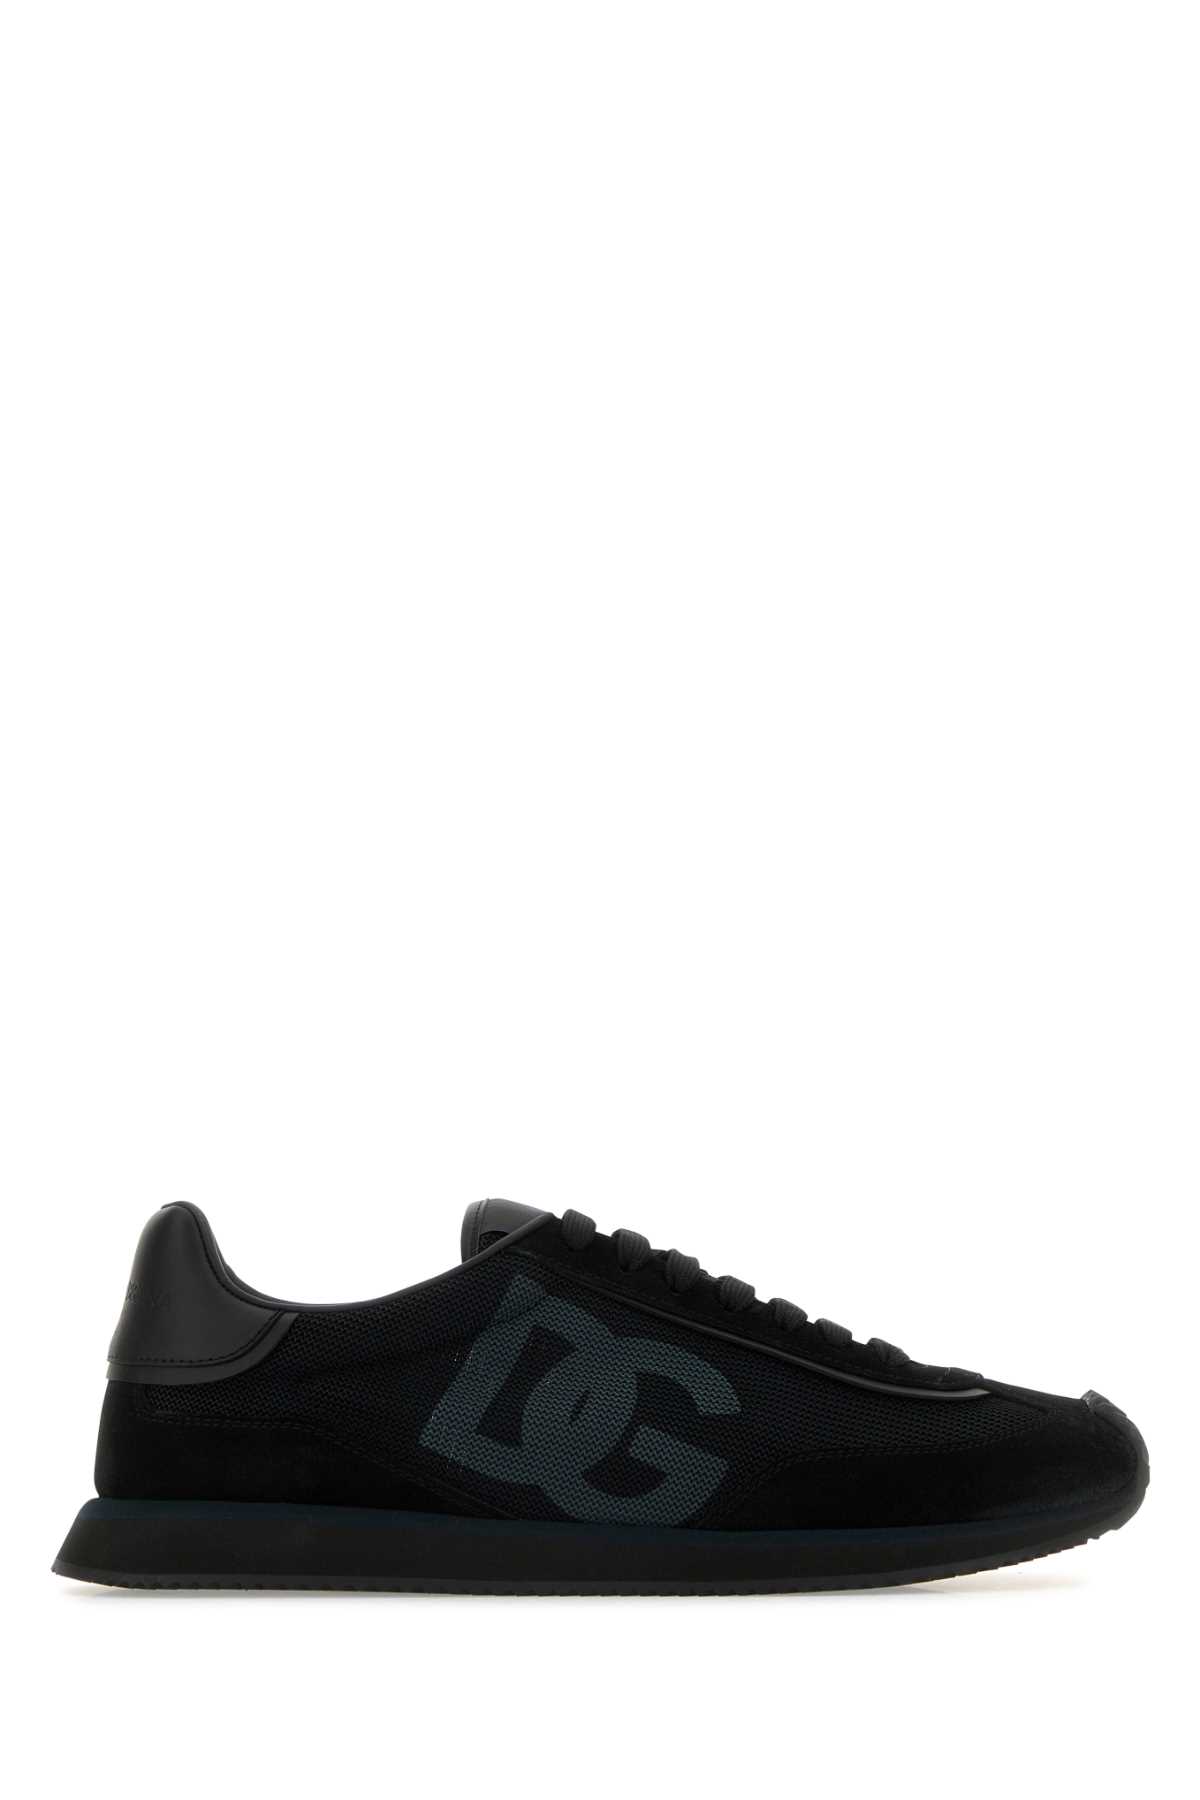 Dolce & Gabbana Black Suede And Mesh Dg Aria Sneakers